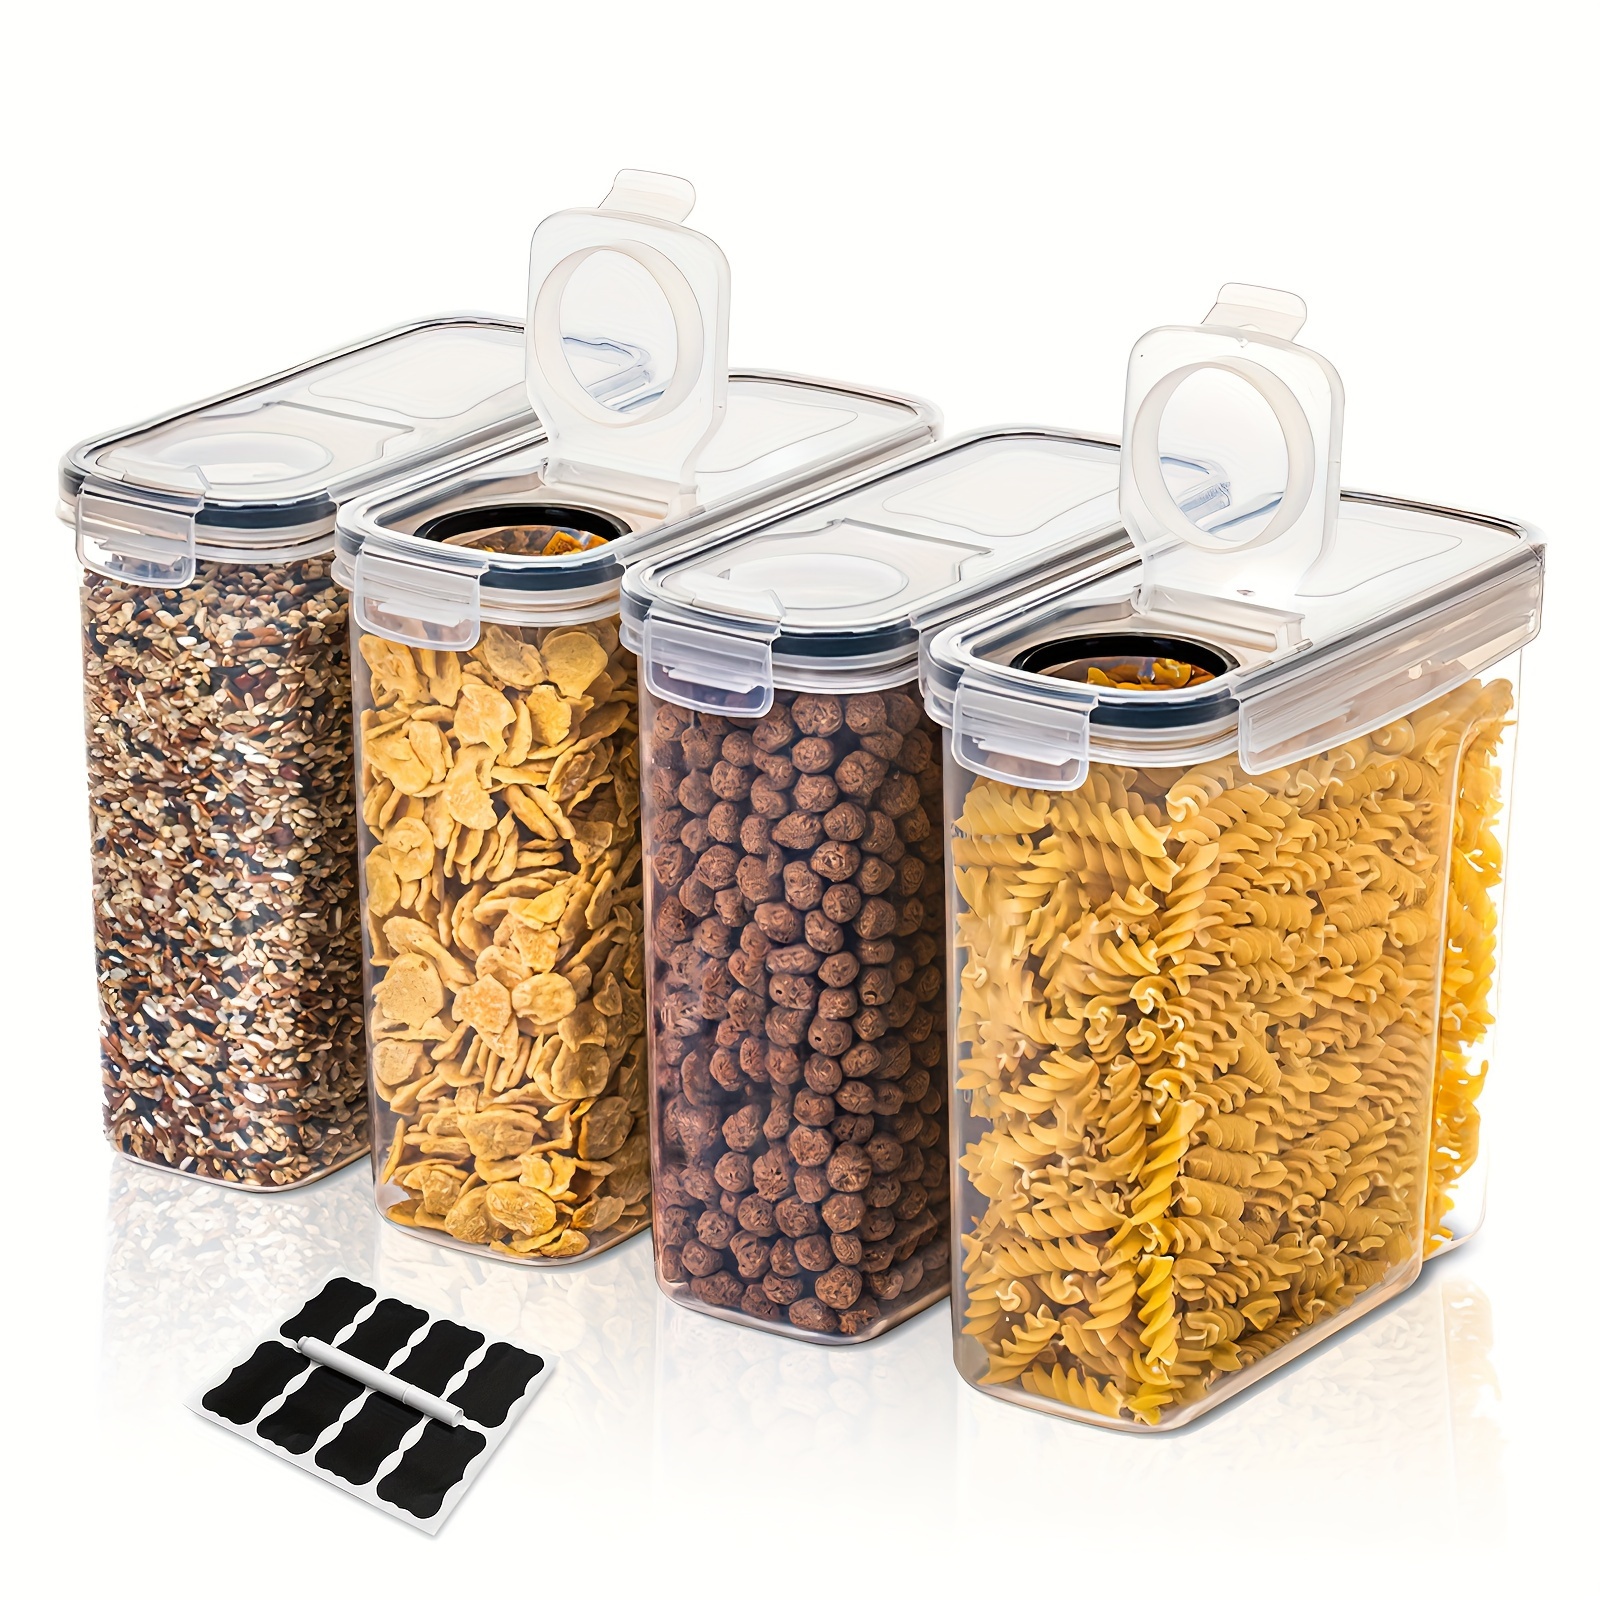 2/4pcs Cereal Storage Container Set, BPA Free Plastic Airtight Food Storage Containers 2.5L/88 Oz For Cereal, Snacks And Sugar